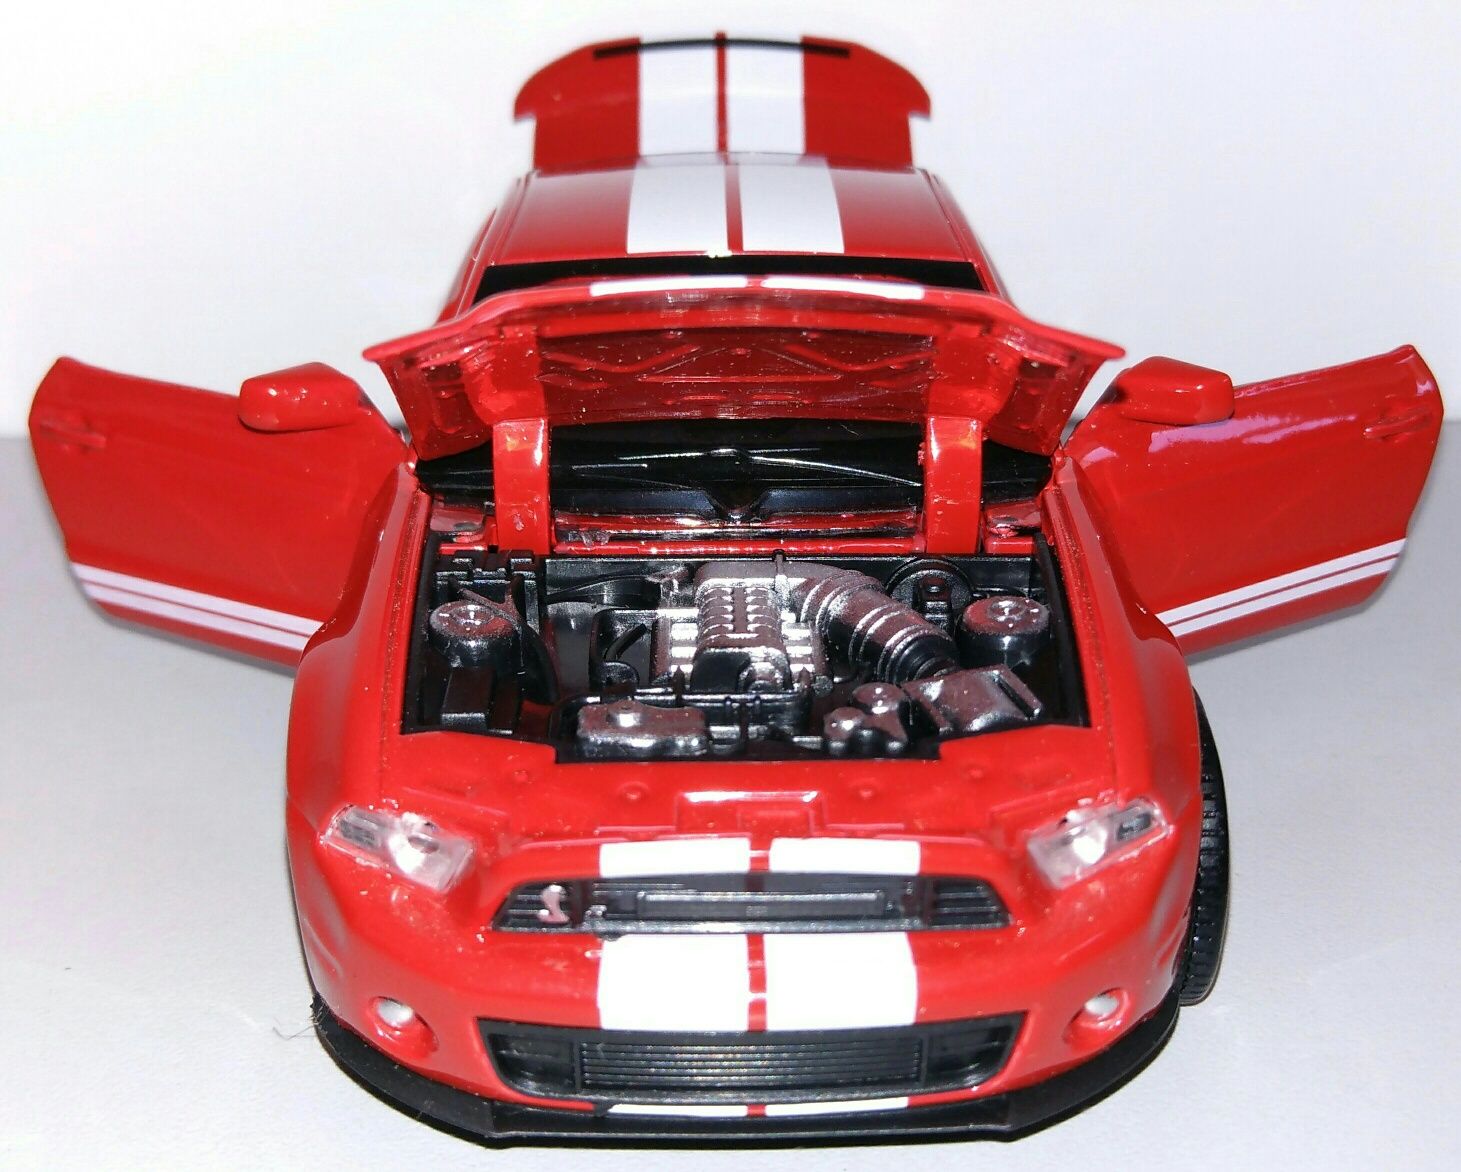 Ford Mustang Shelby GT500 модель 1:32 Double Horses . Метал, звук, све